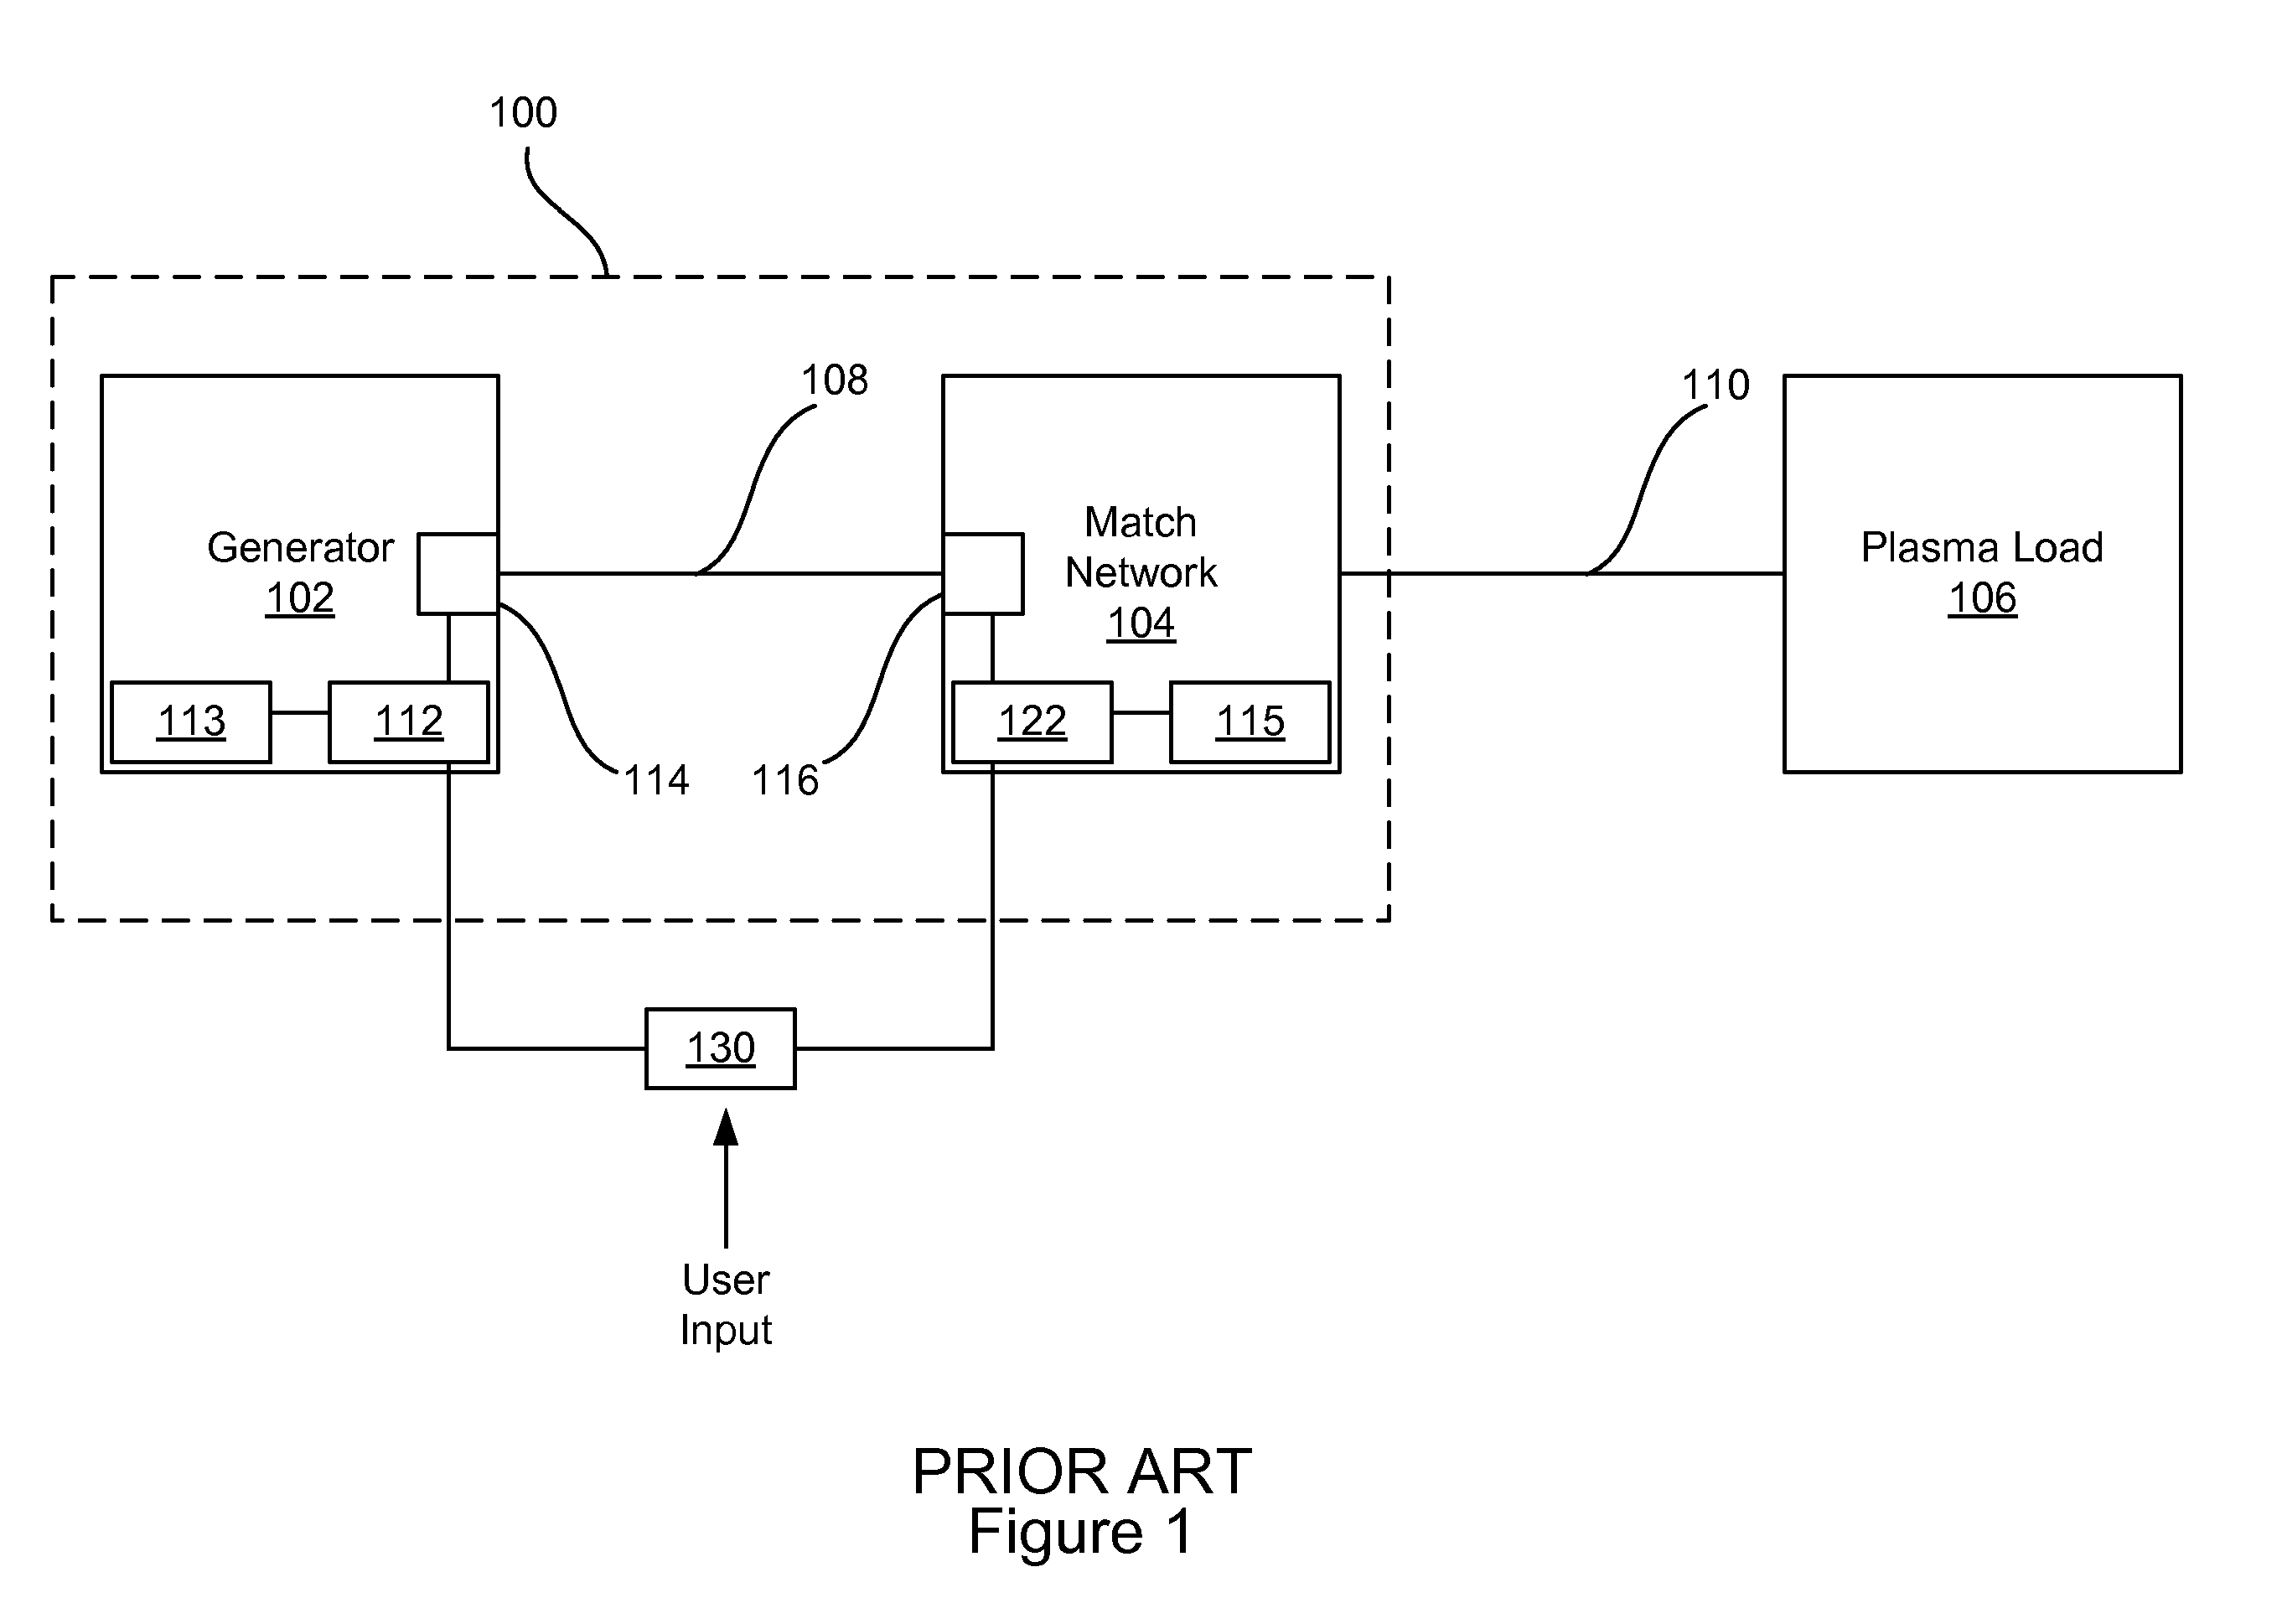 System level power delivery to a plasma processing load